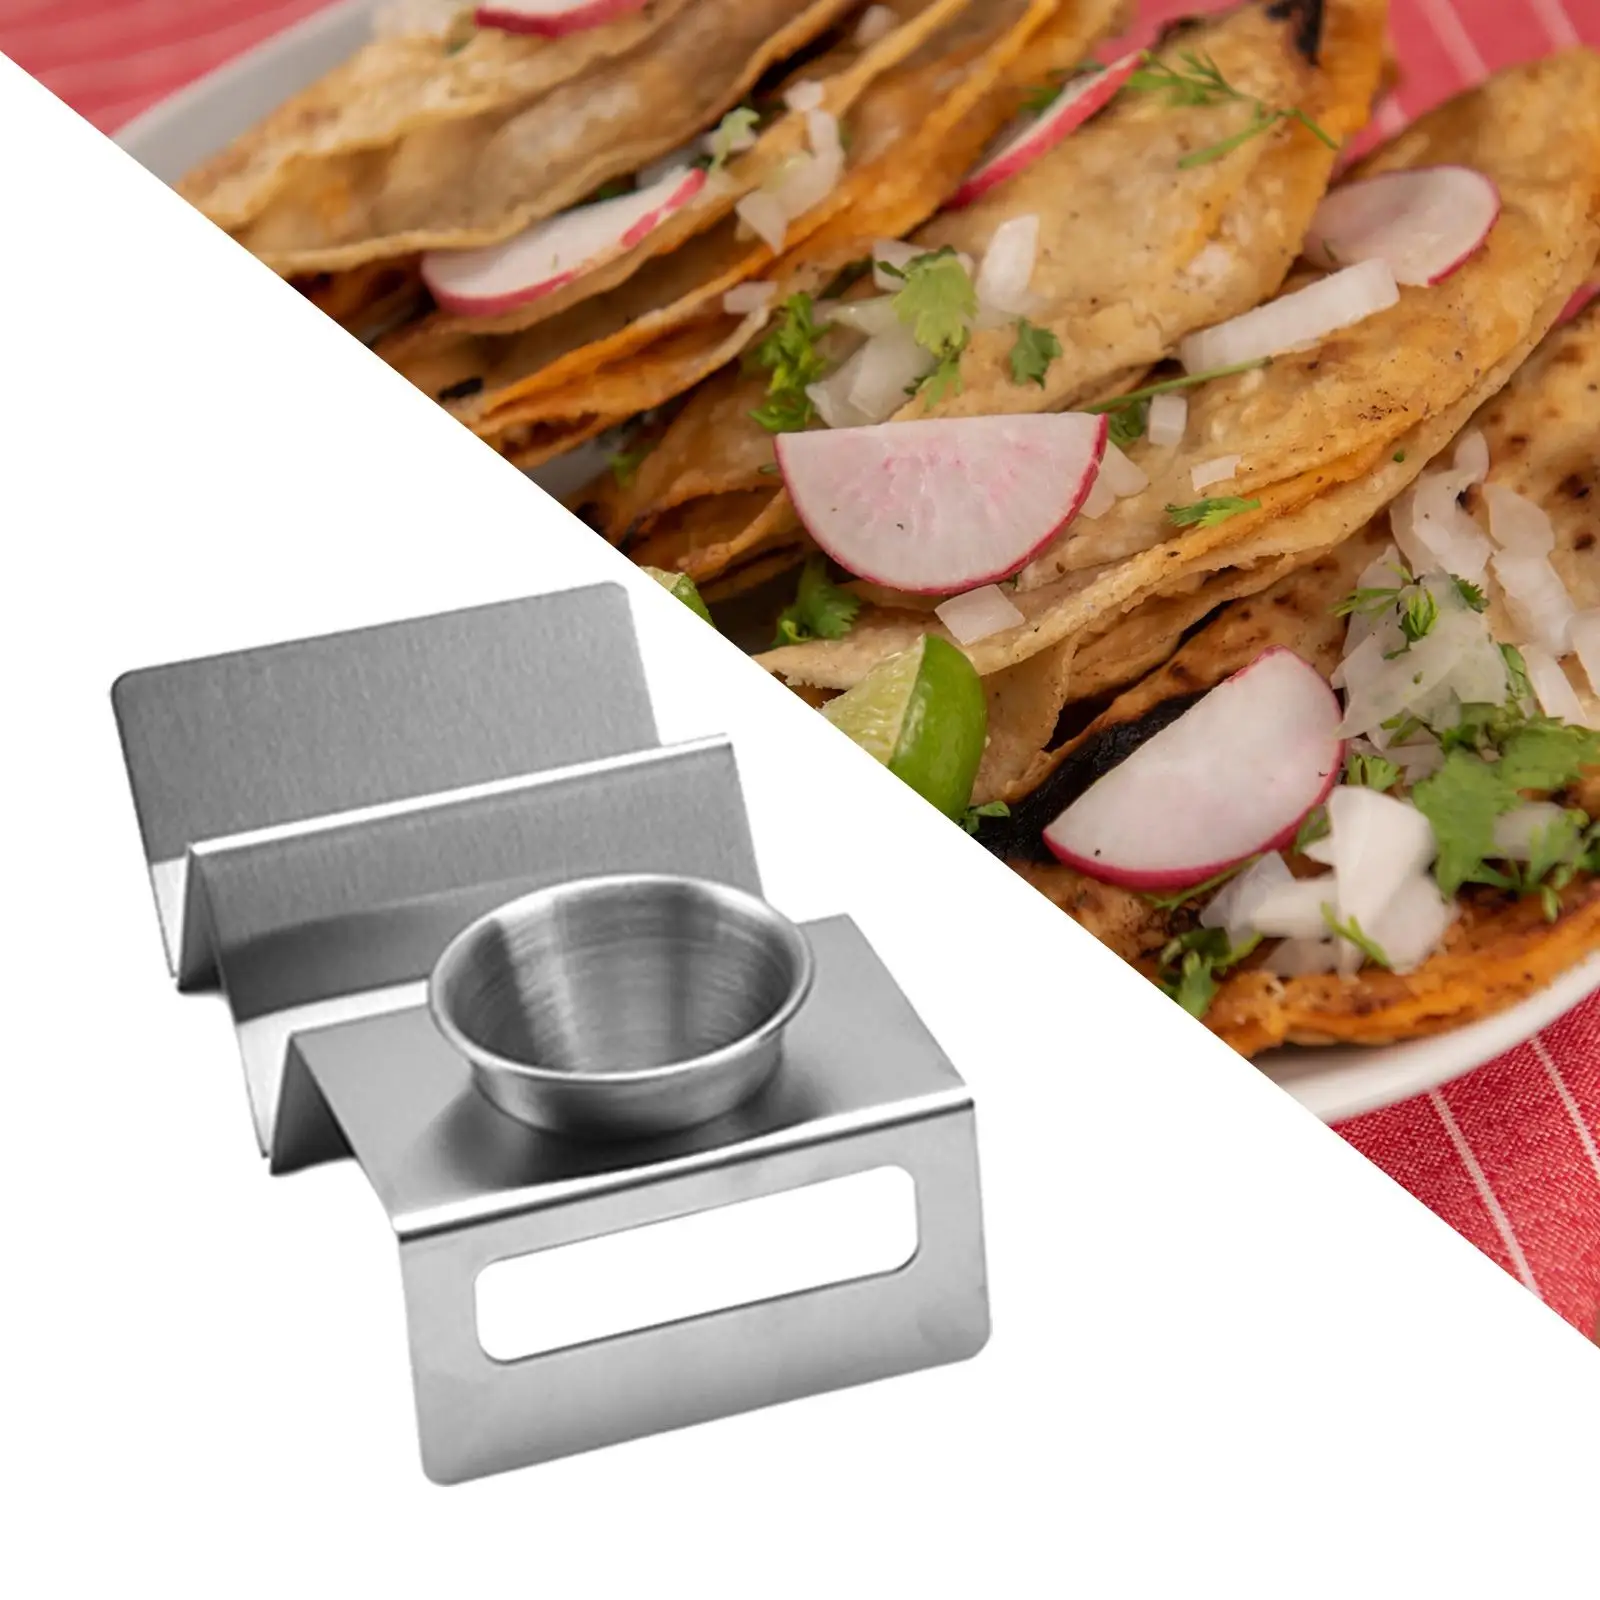 Taco Holder Stand for Kitchen Cooking Tool Restaurant, Home, Picnic, Party, Festivals